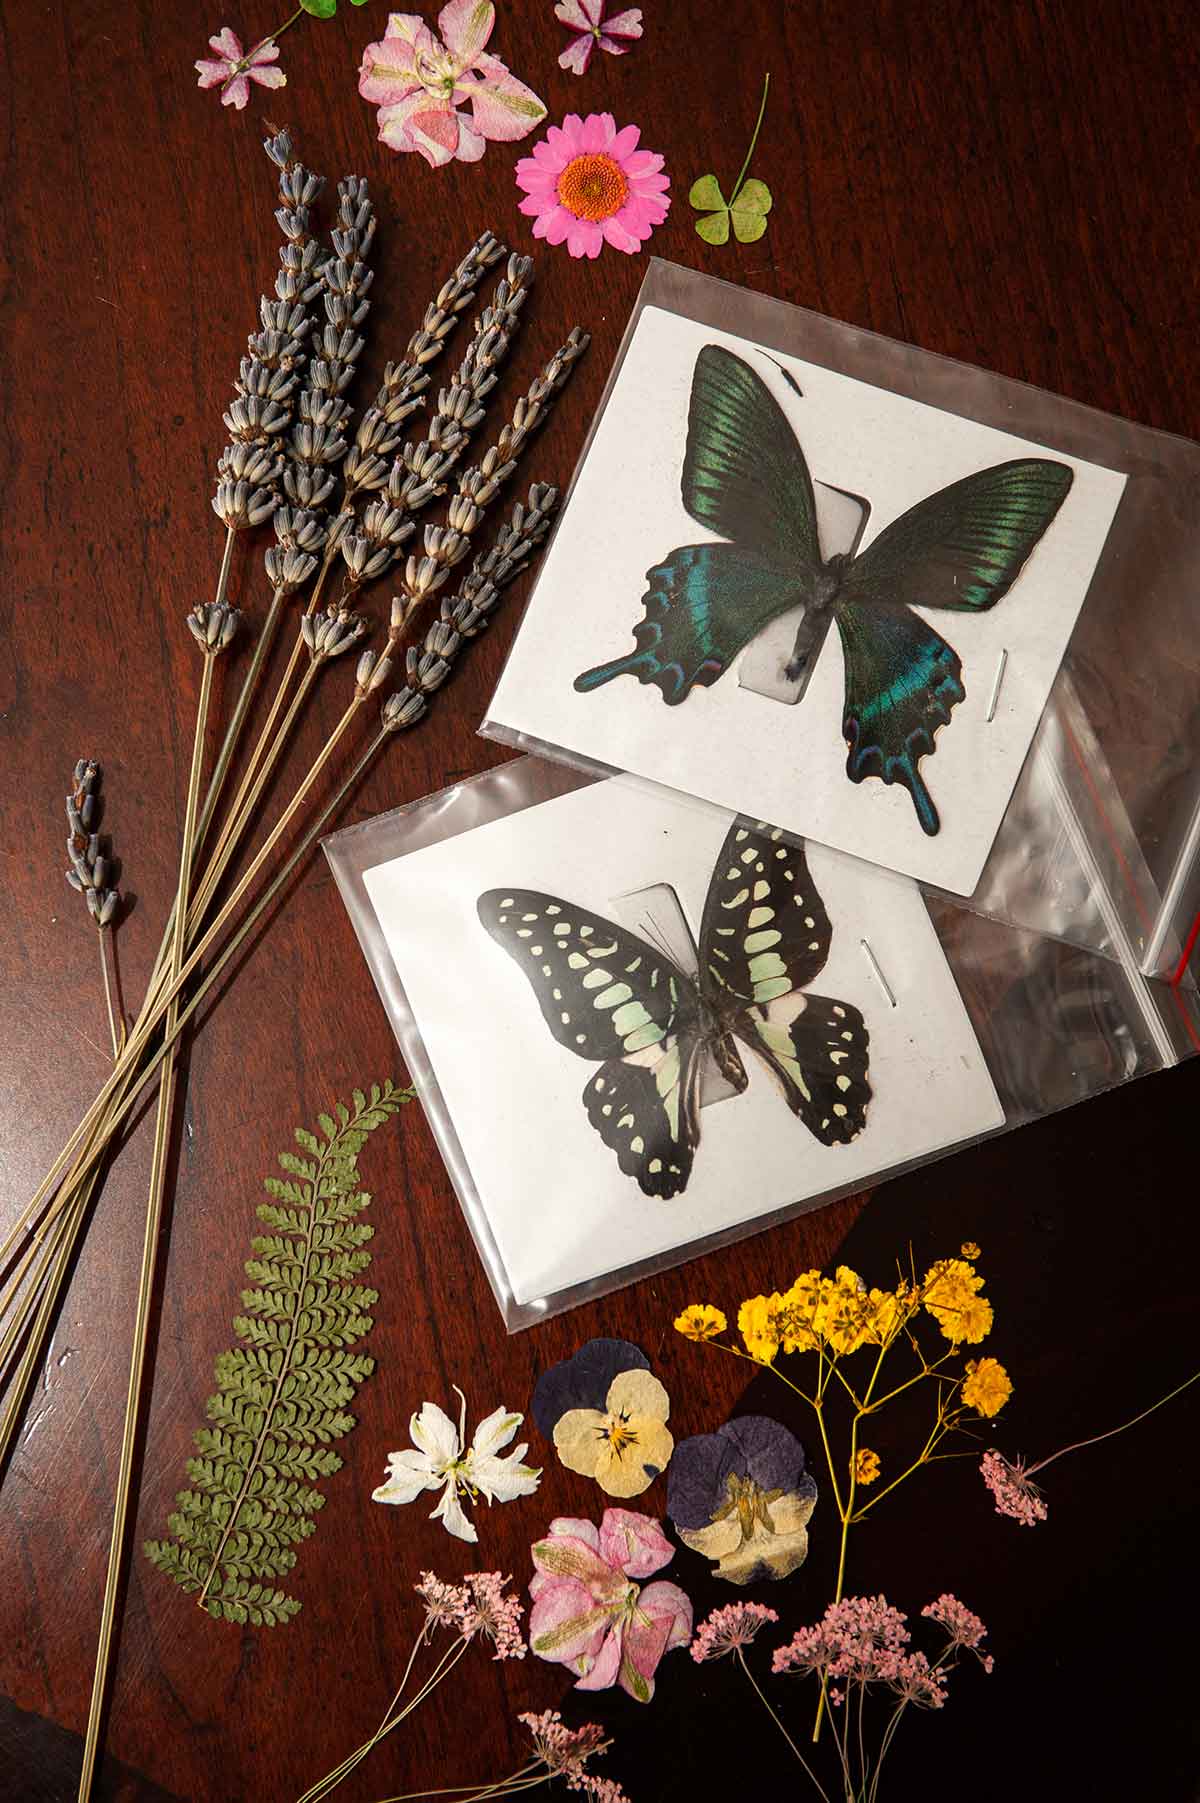 2 butterflies and mixed, dried flowers on a table.